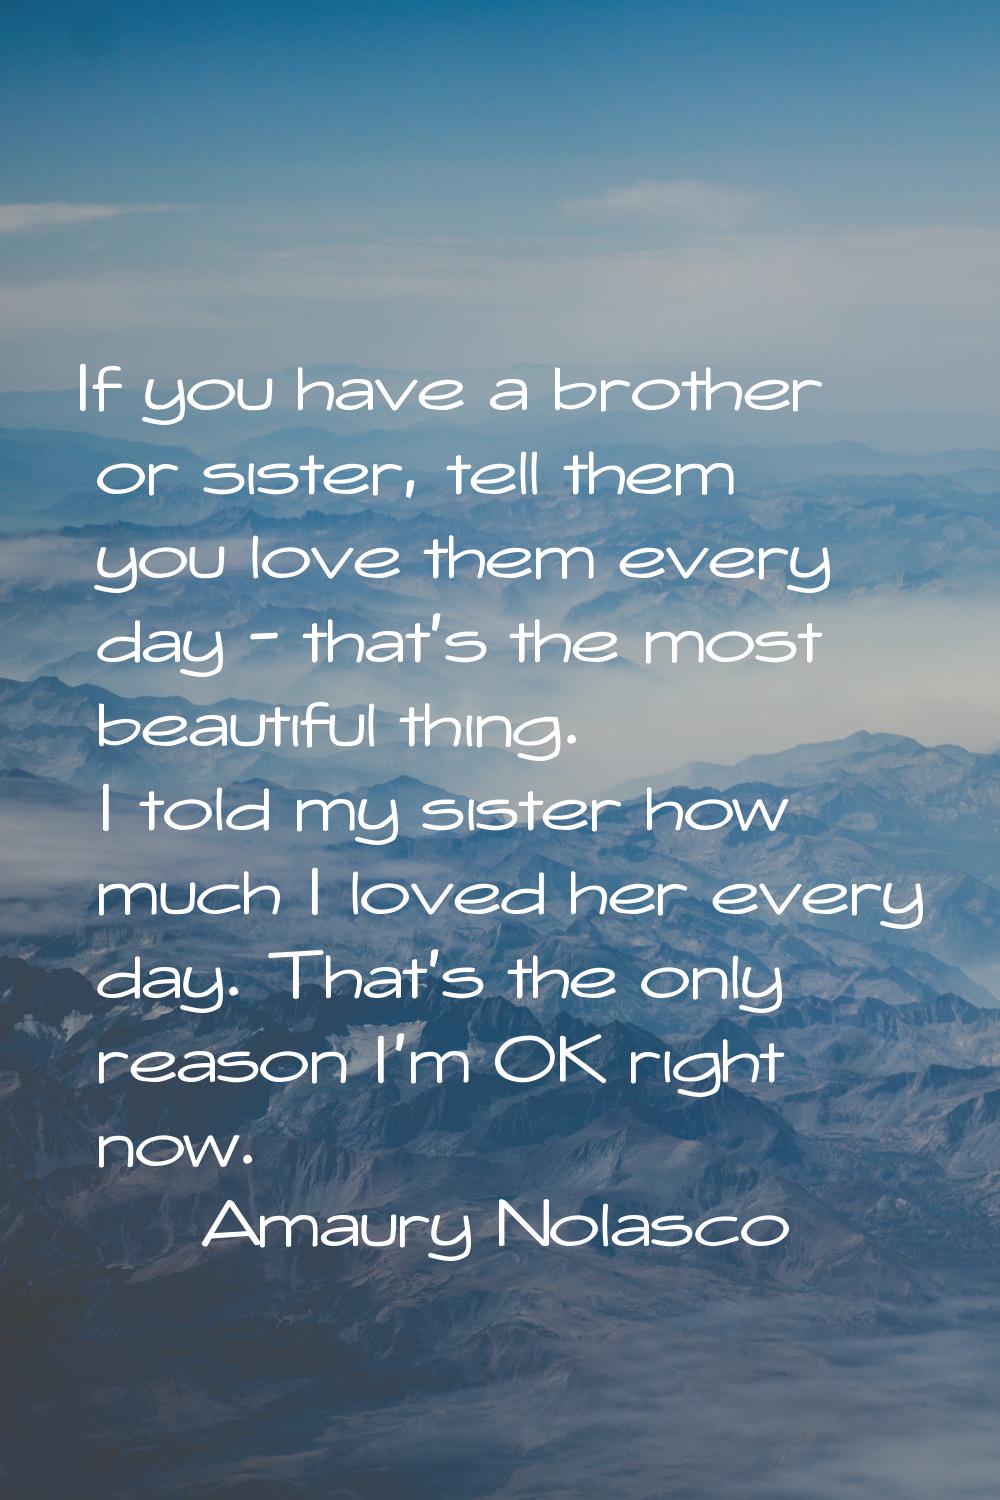 If you have a brother or sister, tell them you love them every day - that's the most beautiful thin